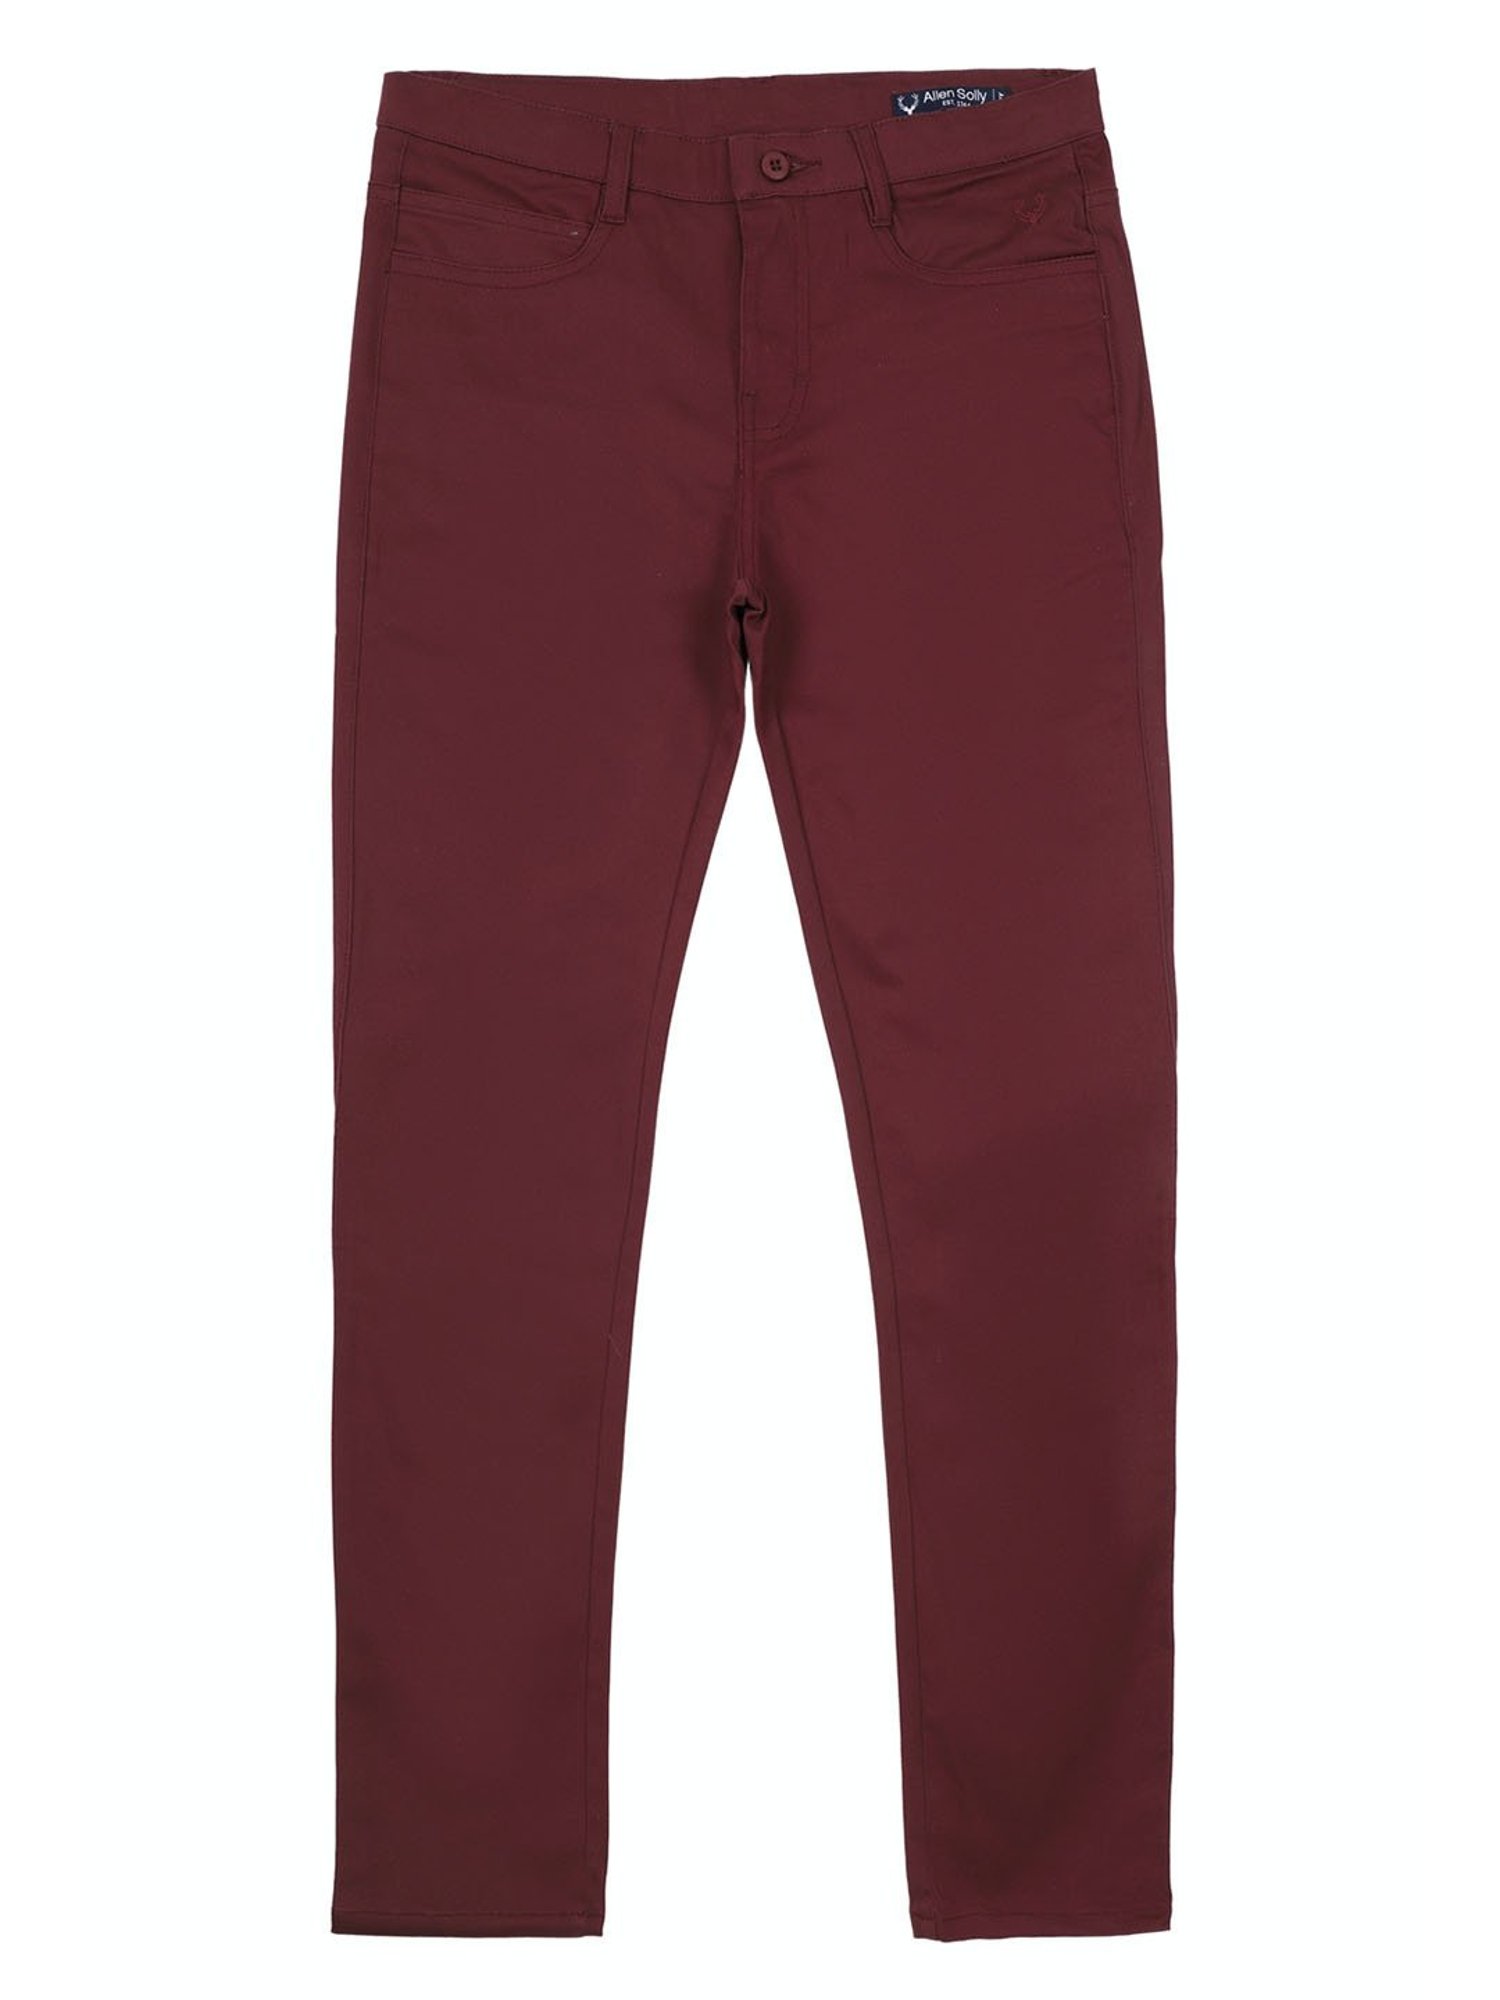 Buy Allen Solly Green Mid Rise Flared Pants for Women Online @ Tata CLiQ